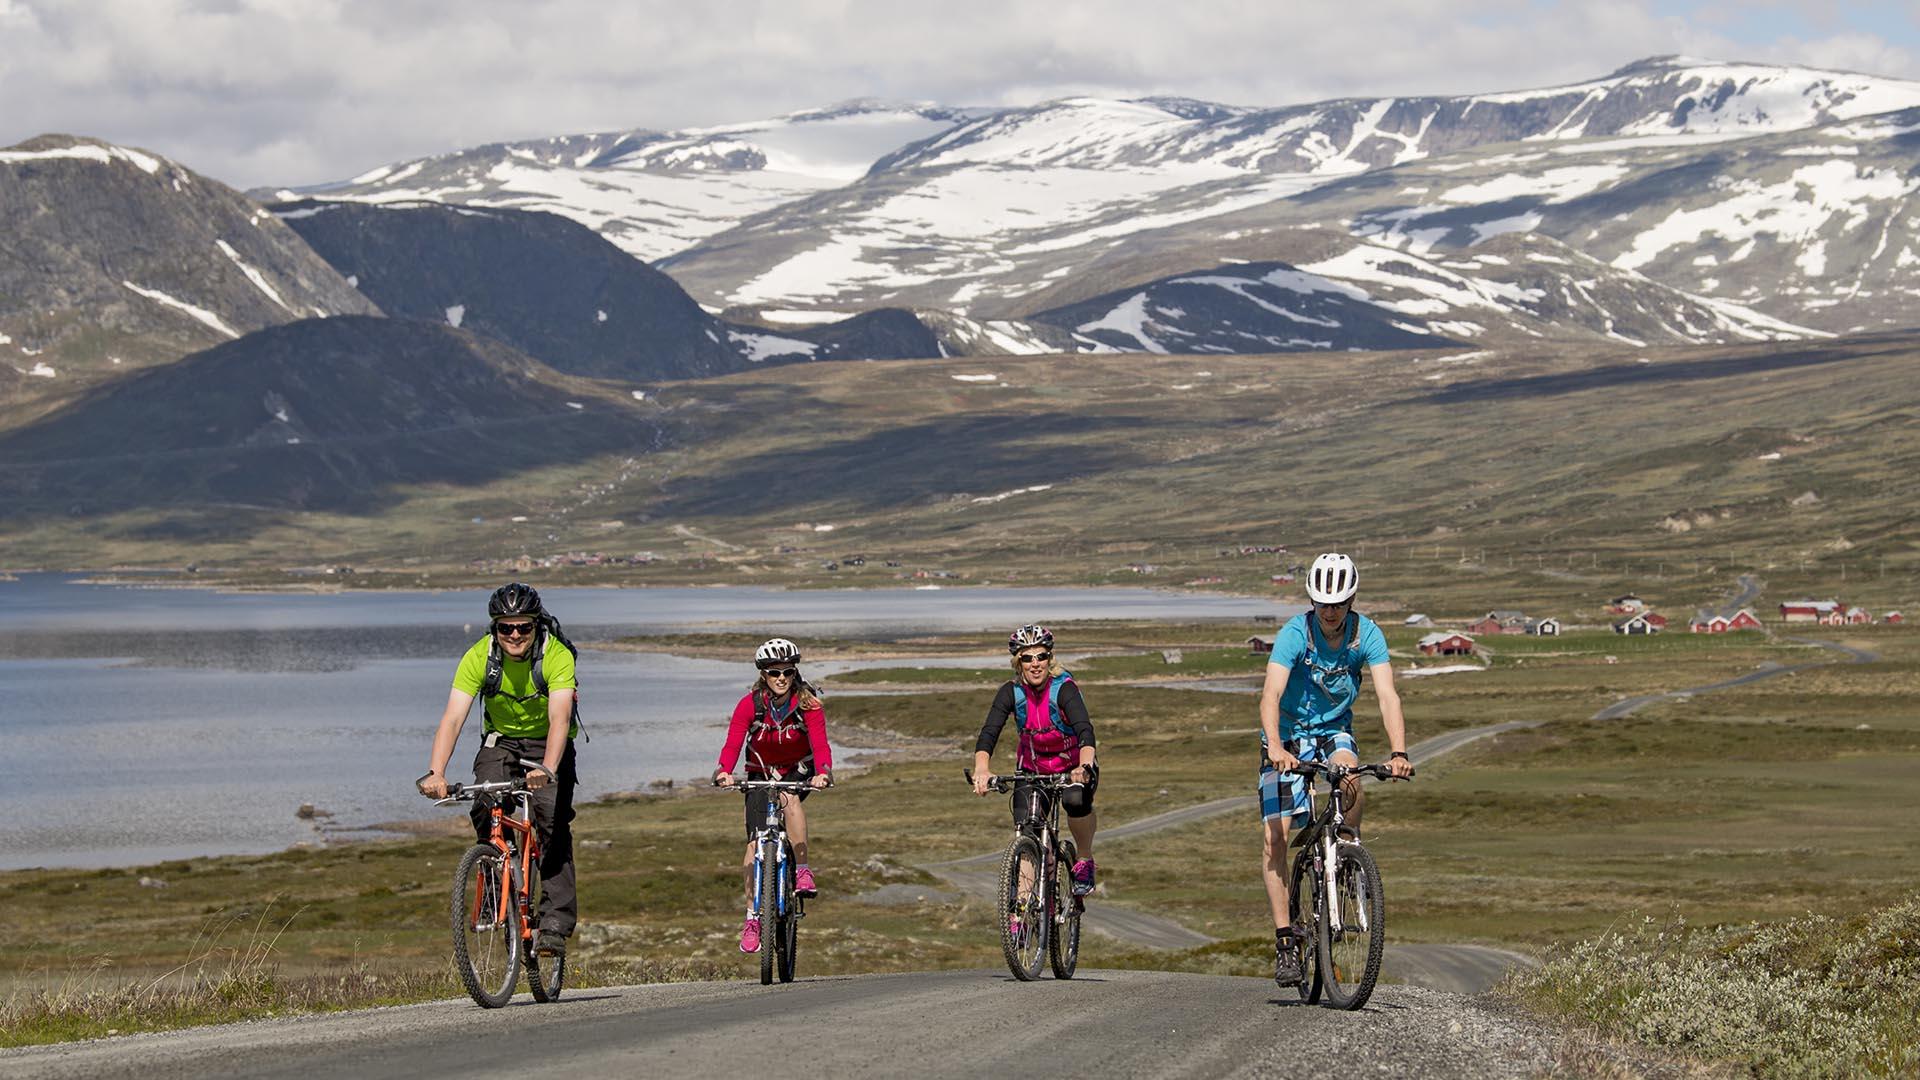 Four cyclists in colourful cycling outfits cycle on a gravel road in the high mountains towards the photographer. In the background there's a larger lake and high mountains still holding snow.